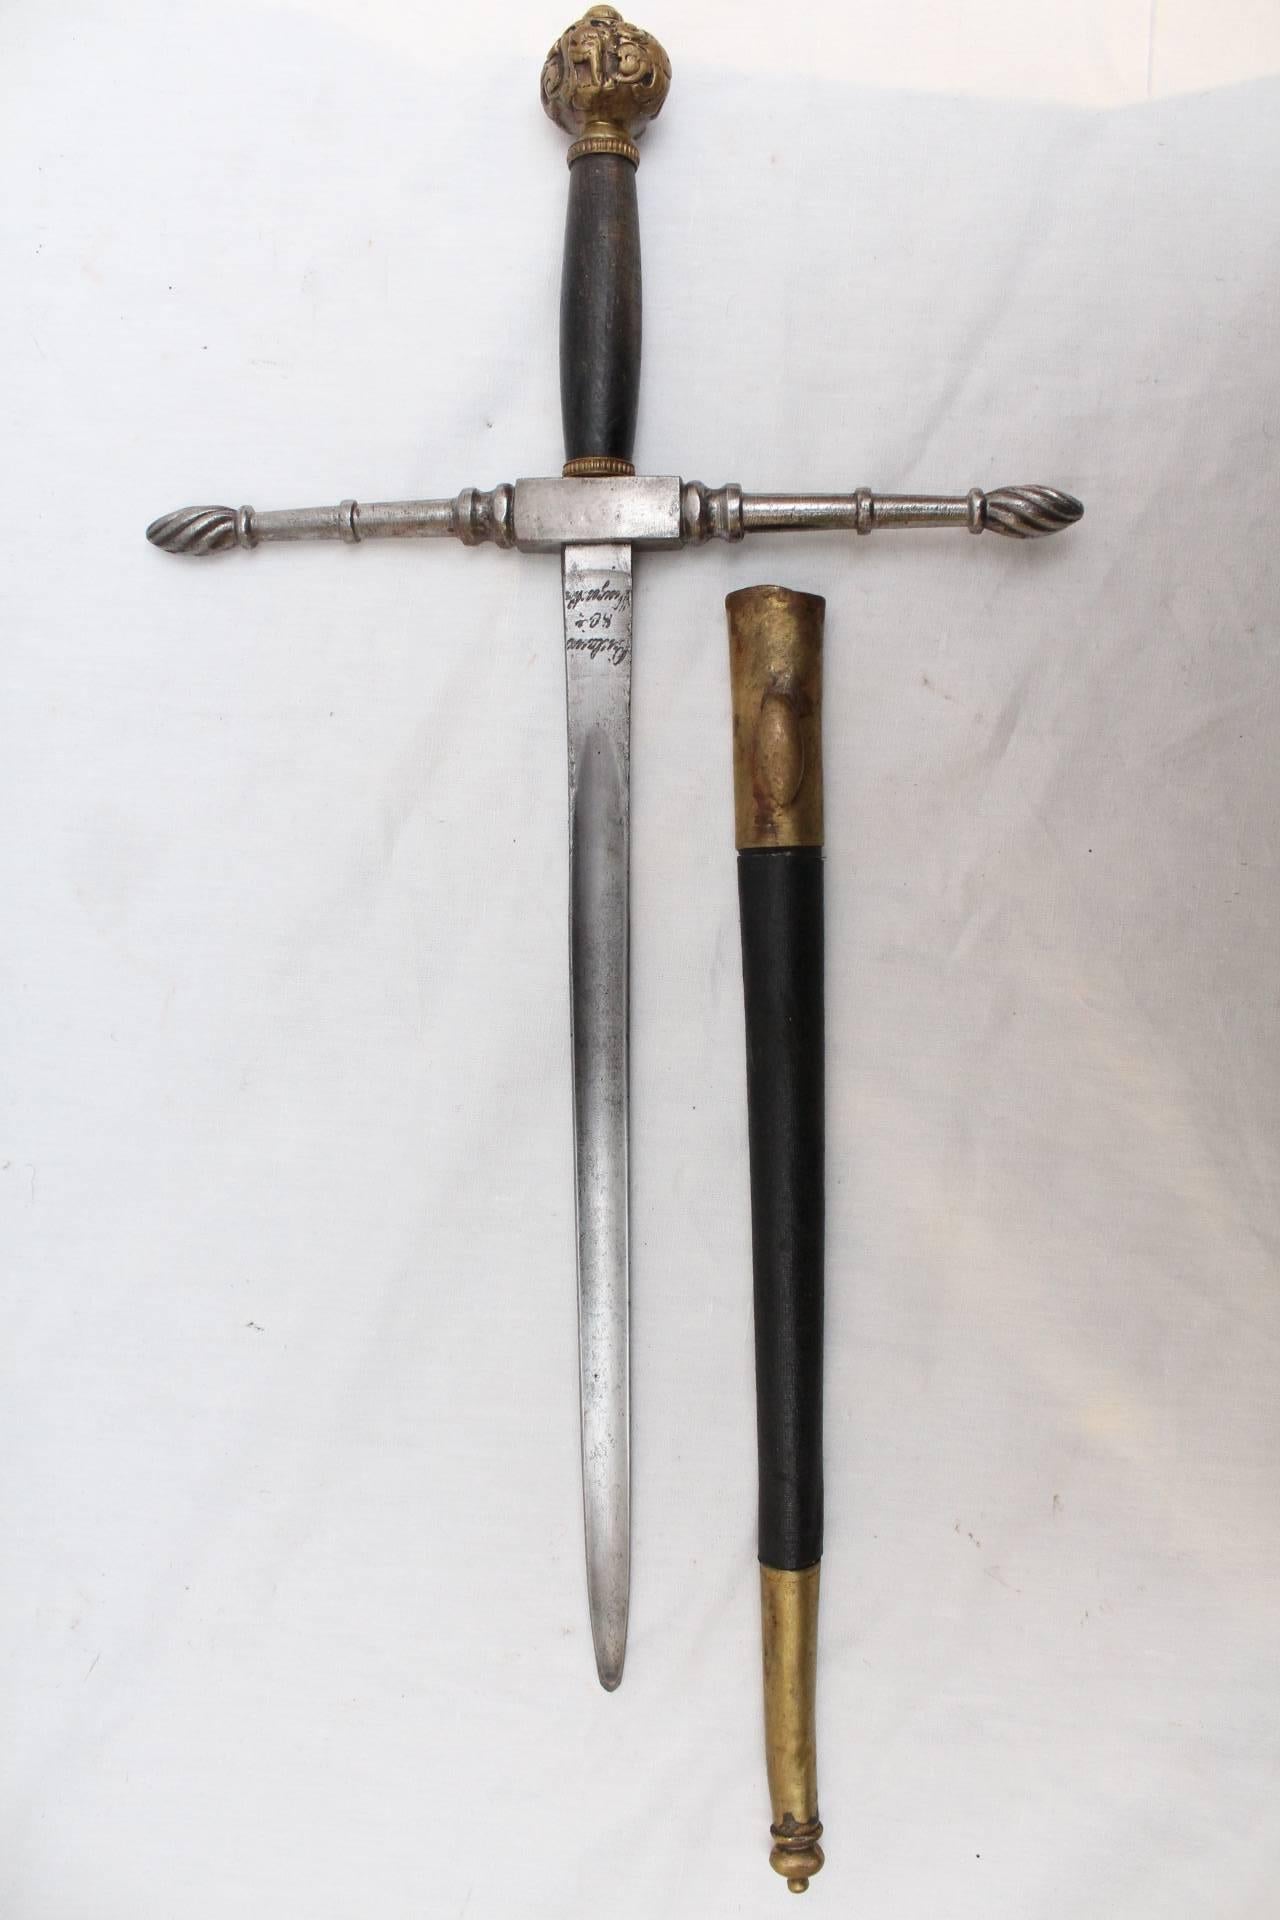 Dagger
19th Century 
France

This dagger shows an interesting work on the handle. The sheath is joined, but must have been made later.
This piece was part of a collection. 

More models available, please contact us for any further